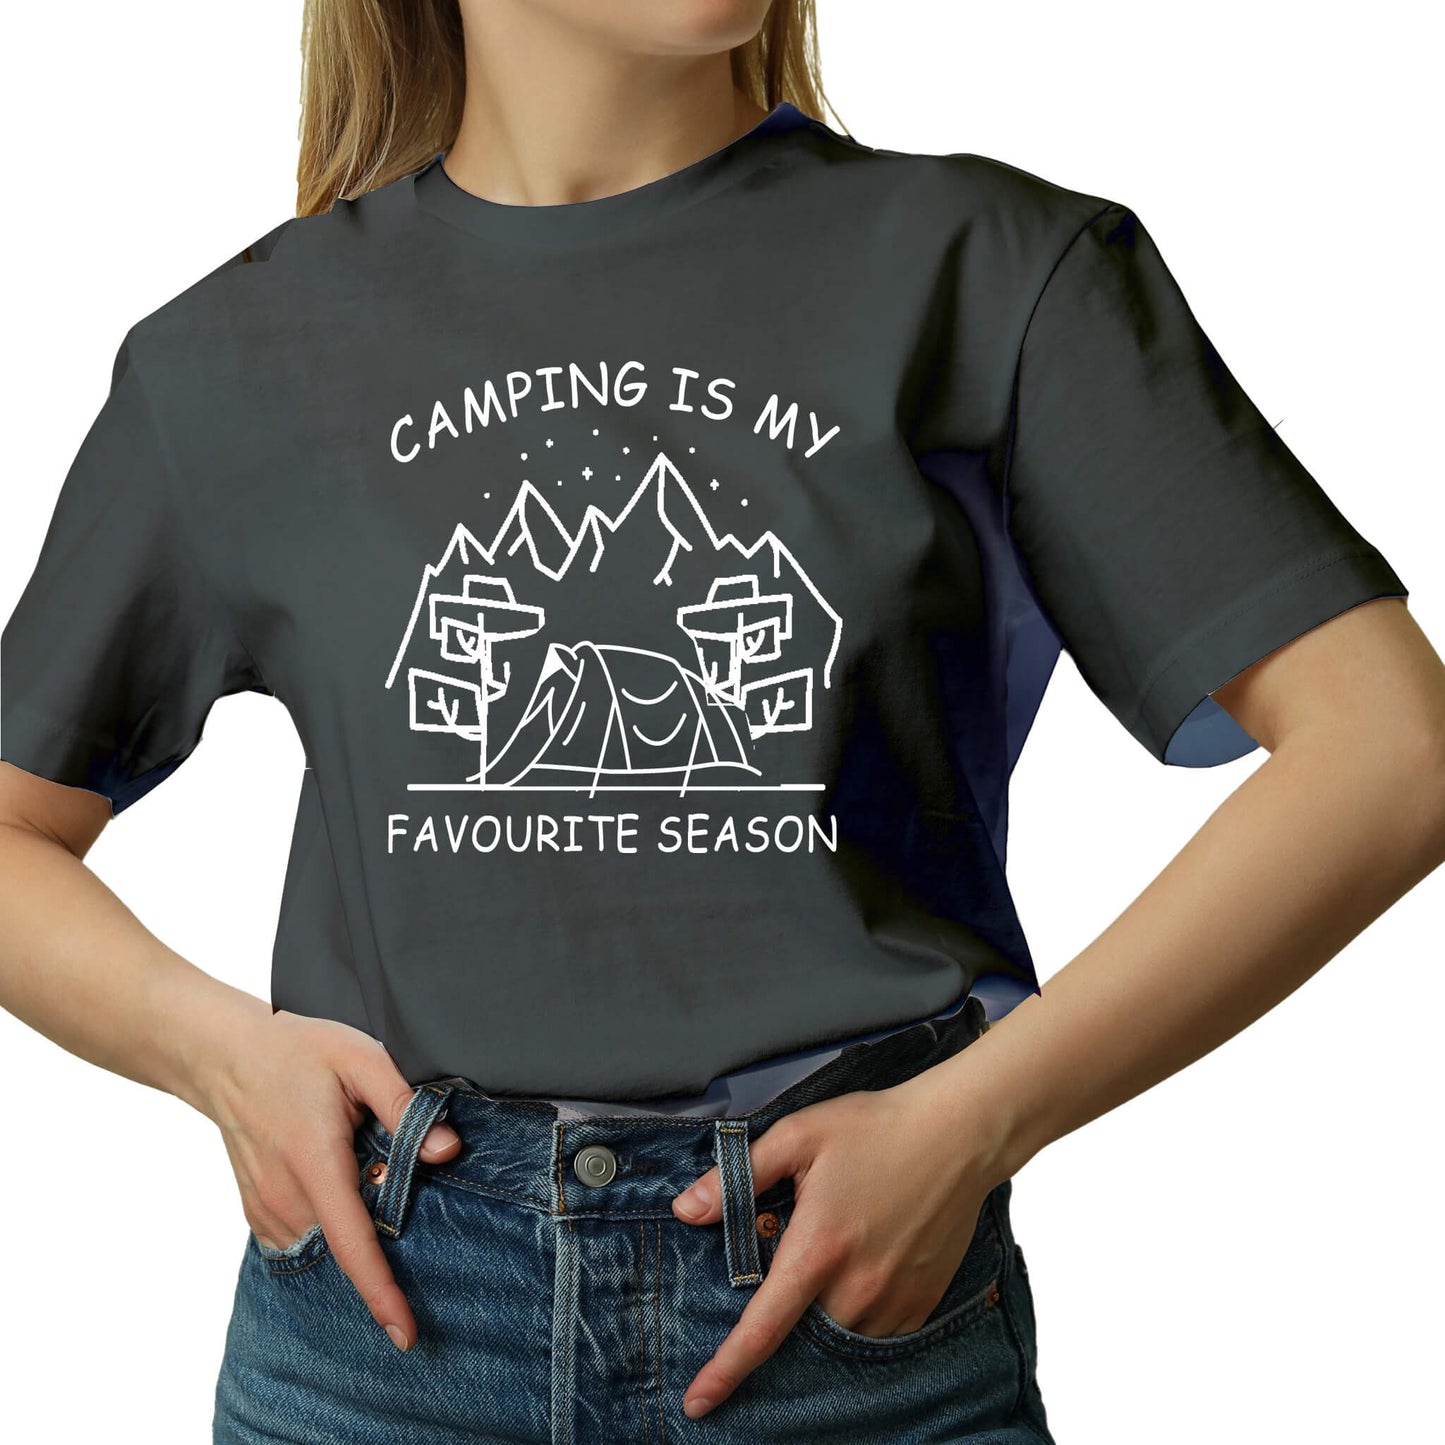  "grey Graphic tee with an illustration of a tent, surrounded by nature. Text reads: 'Camping is my favorite season.' Celebrate the great outdoors!"